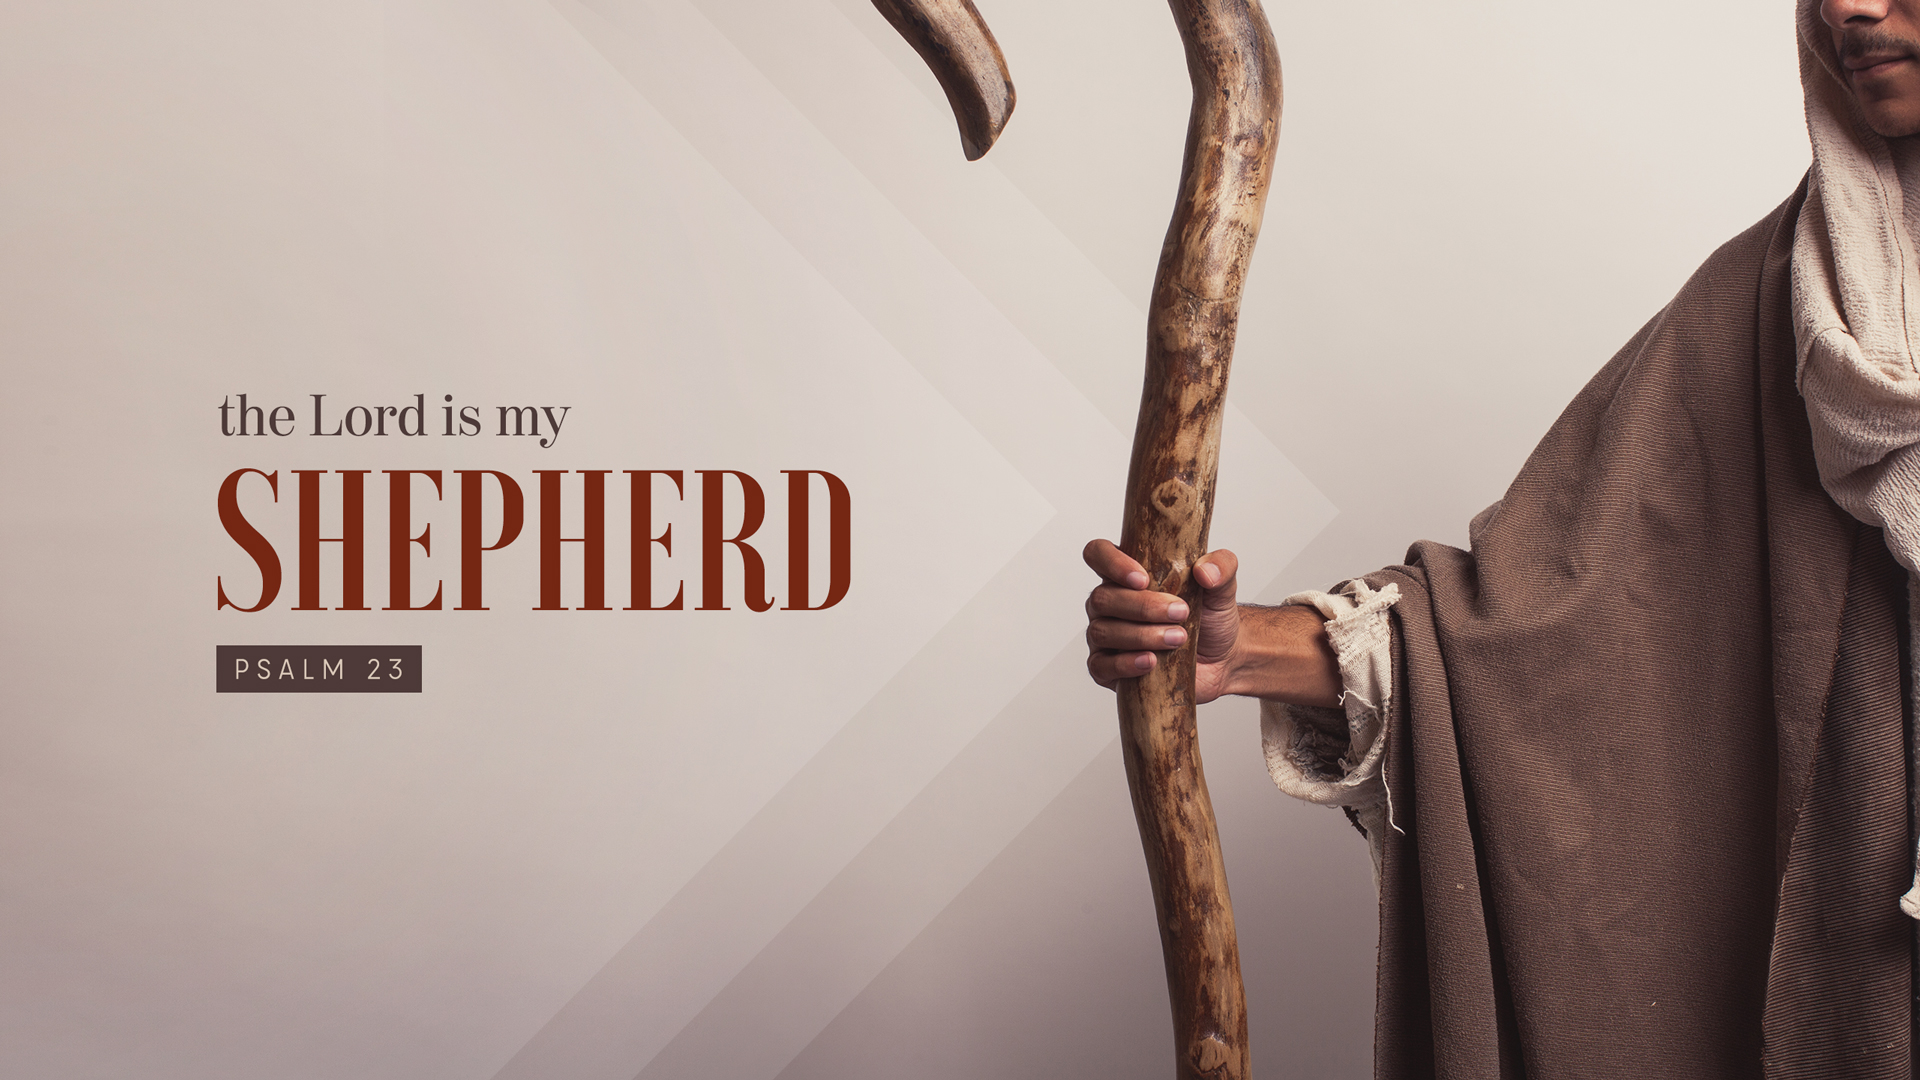 Wallpaper: The Lord is My Shepherd - Jacob Abshire